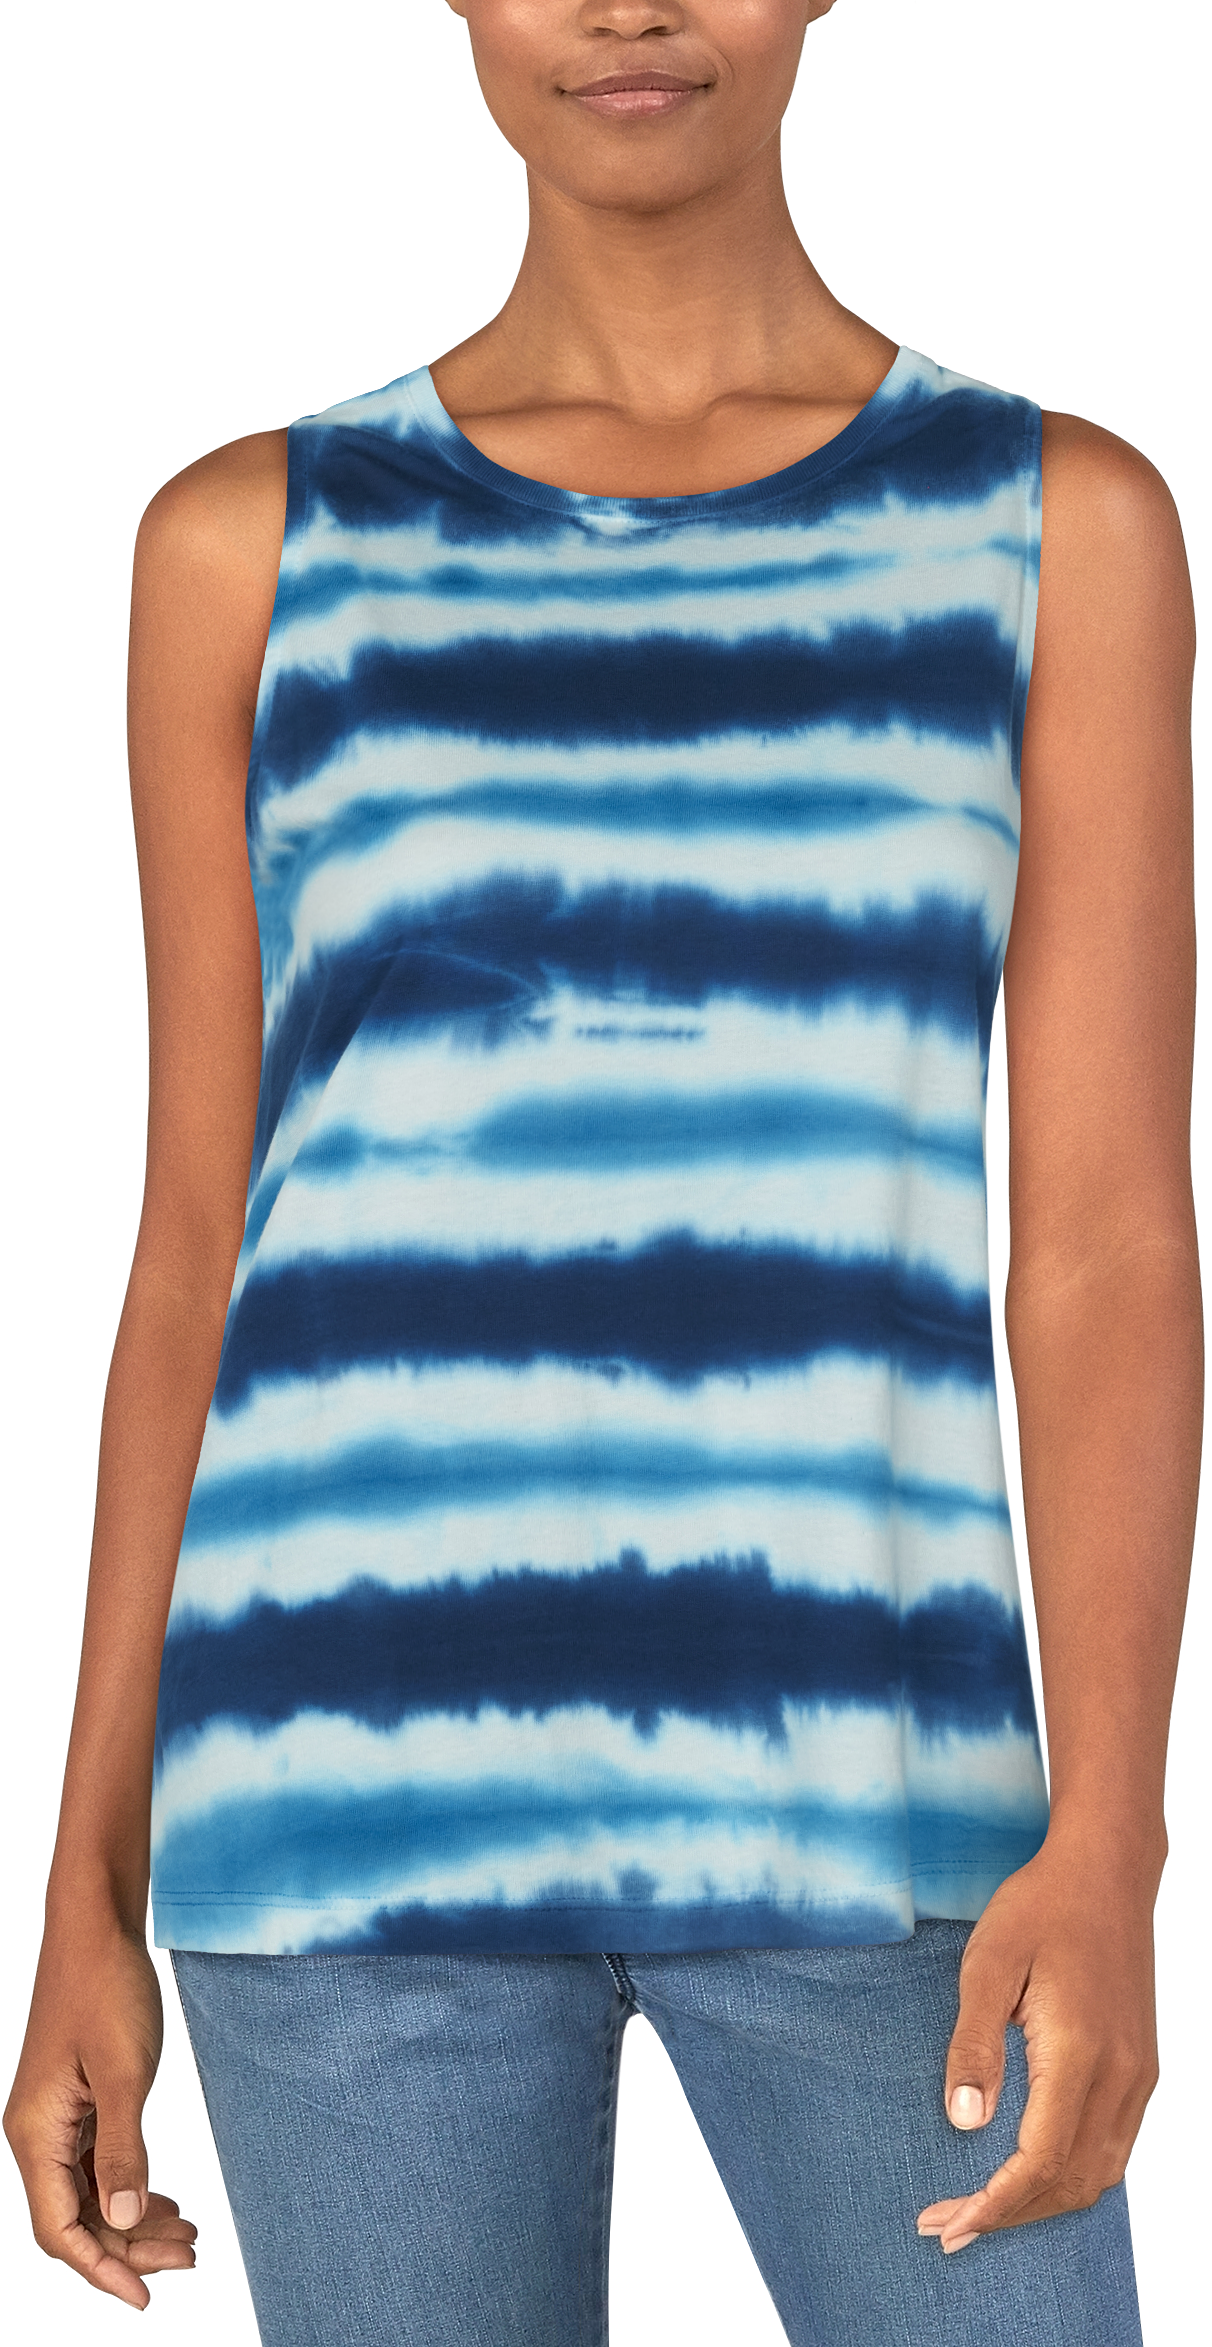 Natural Reflections Tank Top for Ladies - Mykonos Blue - M product image